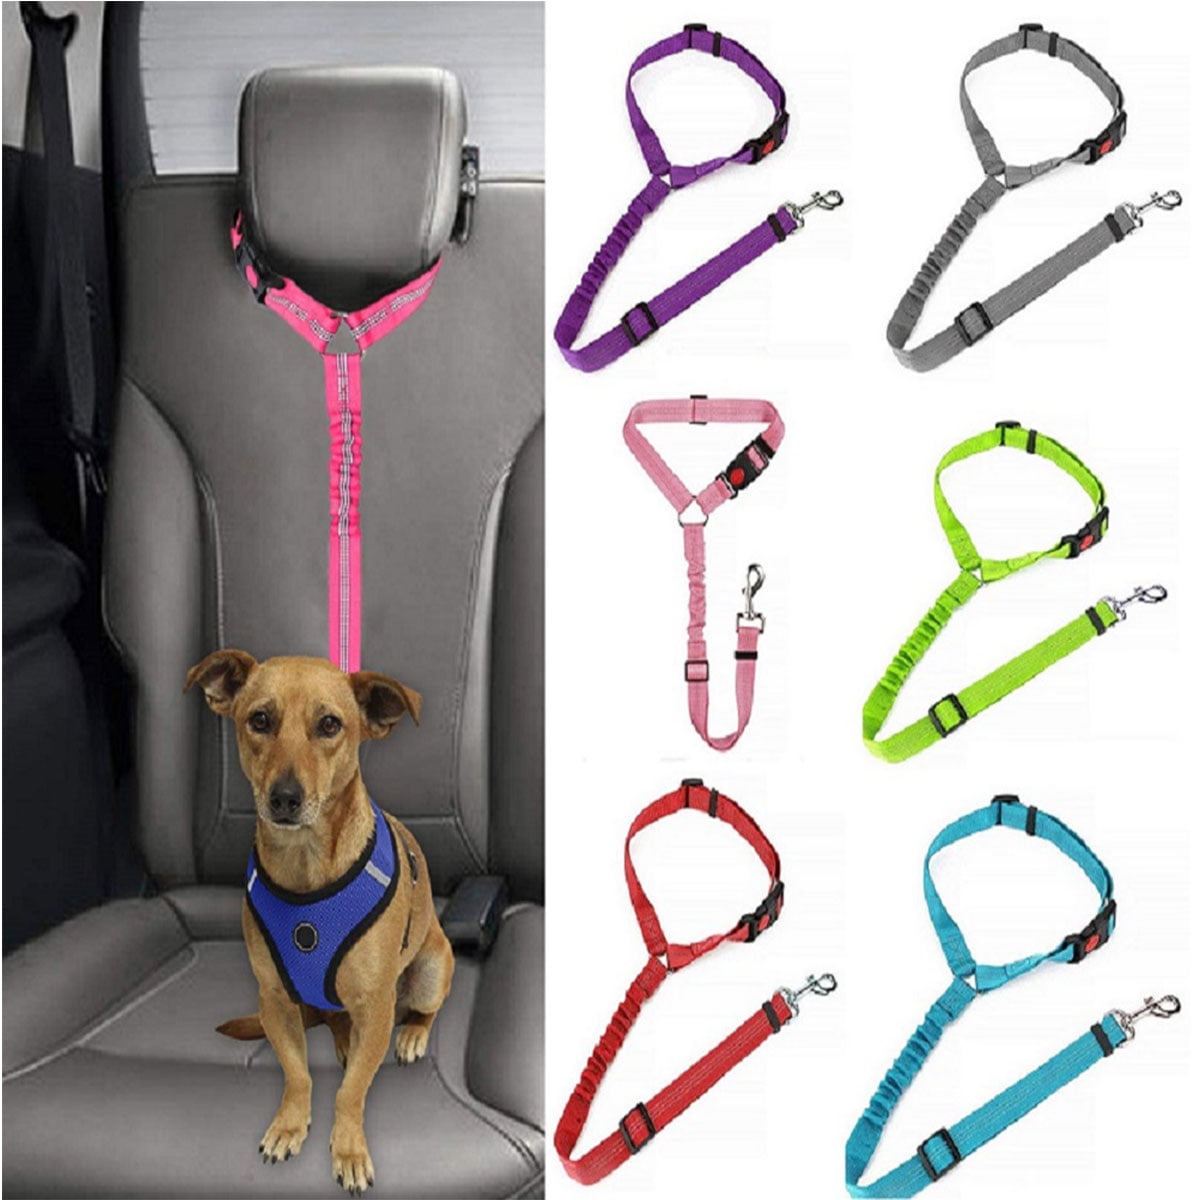 UPODA Dog Seat Belt Adjustable Safety Car Belt Heavy Duty Seatbelts Elastic Tether for Pets Cats Harness 2 Pack 